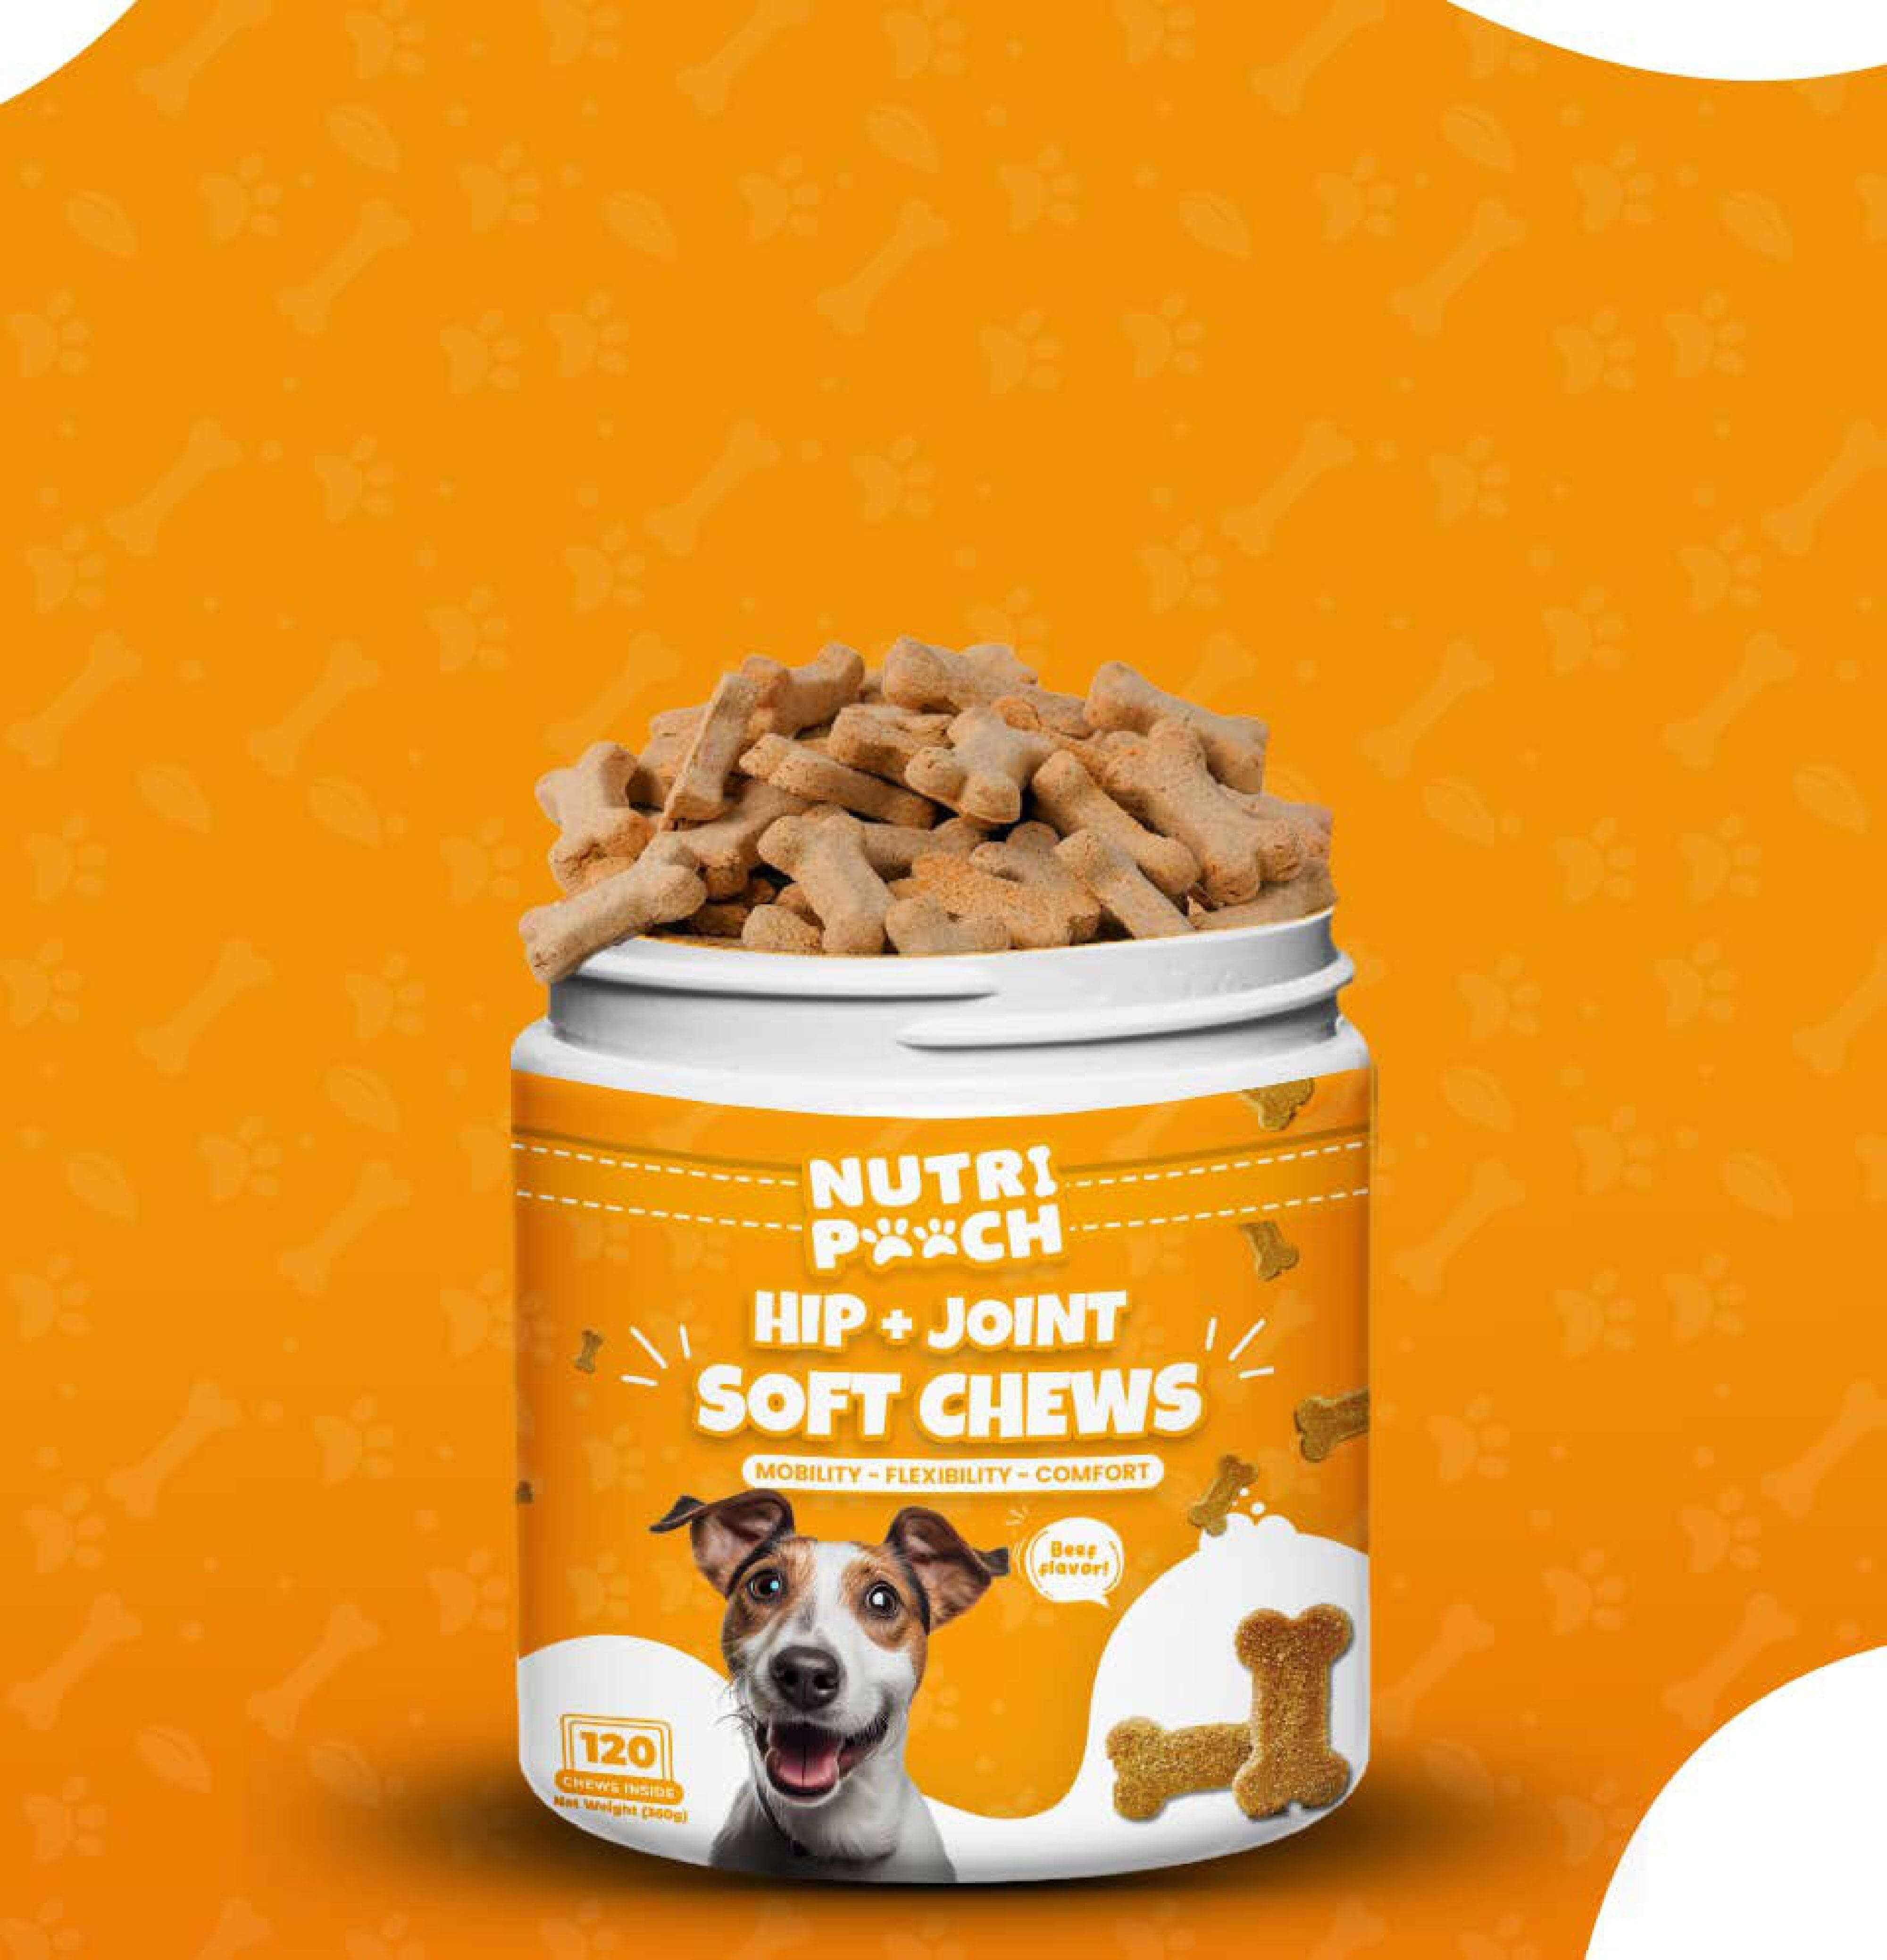 Hip + Joint Soft Chews -